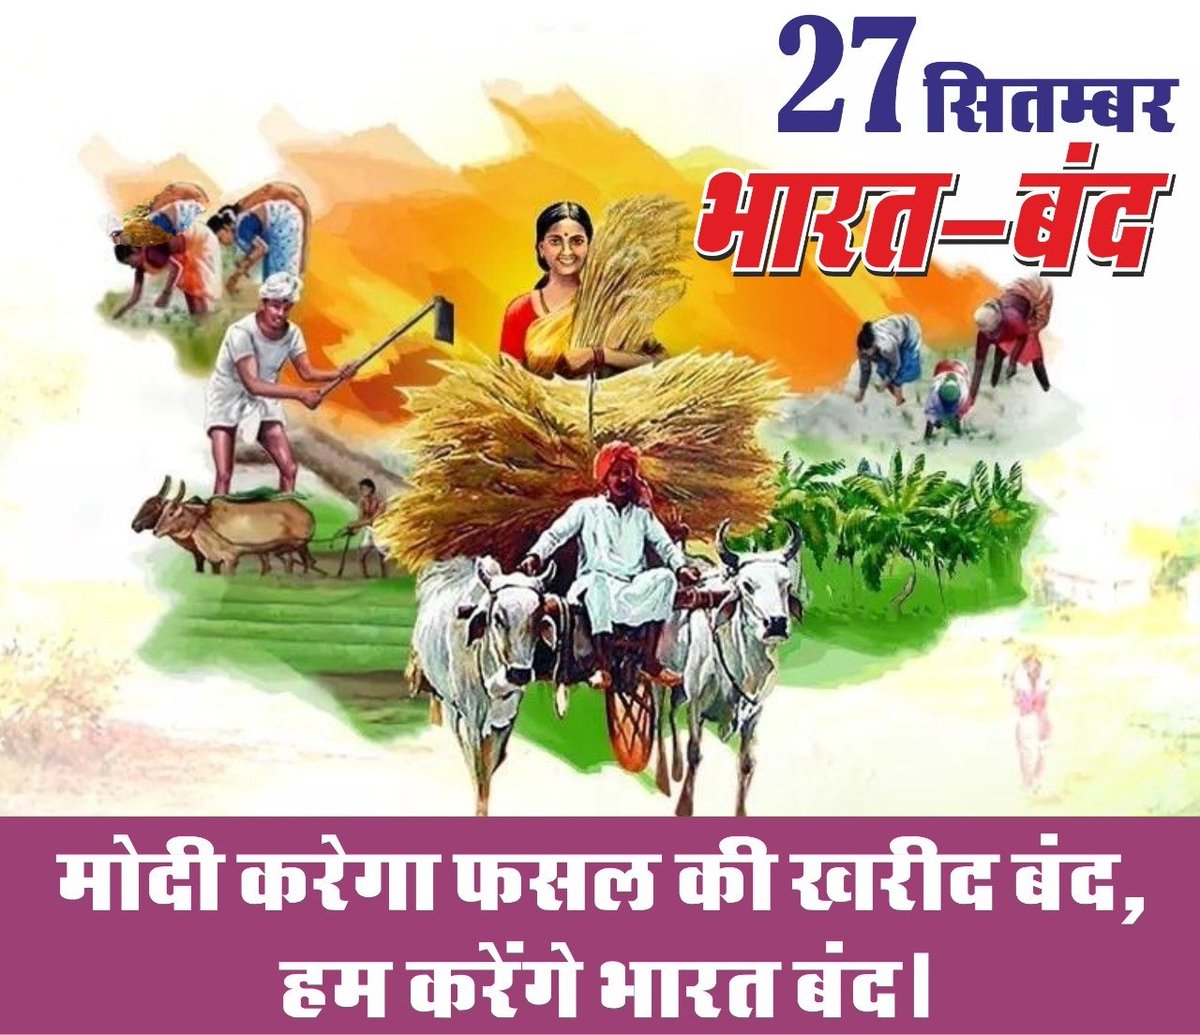 The protest is on.

The fight is on.

We'll win ✊

(27th Sept / Bharat Bandh)

#27Sept_BharatBandhWithFarmers